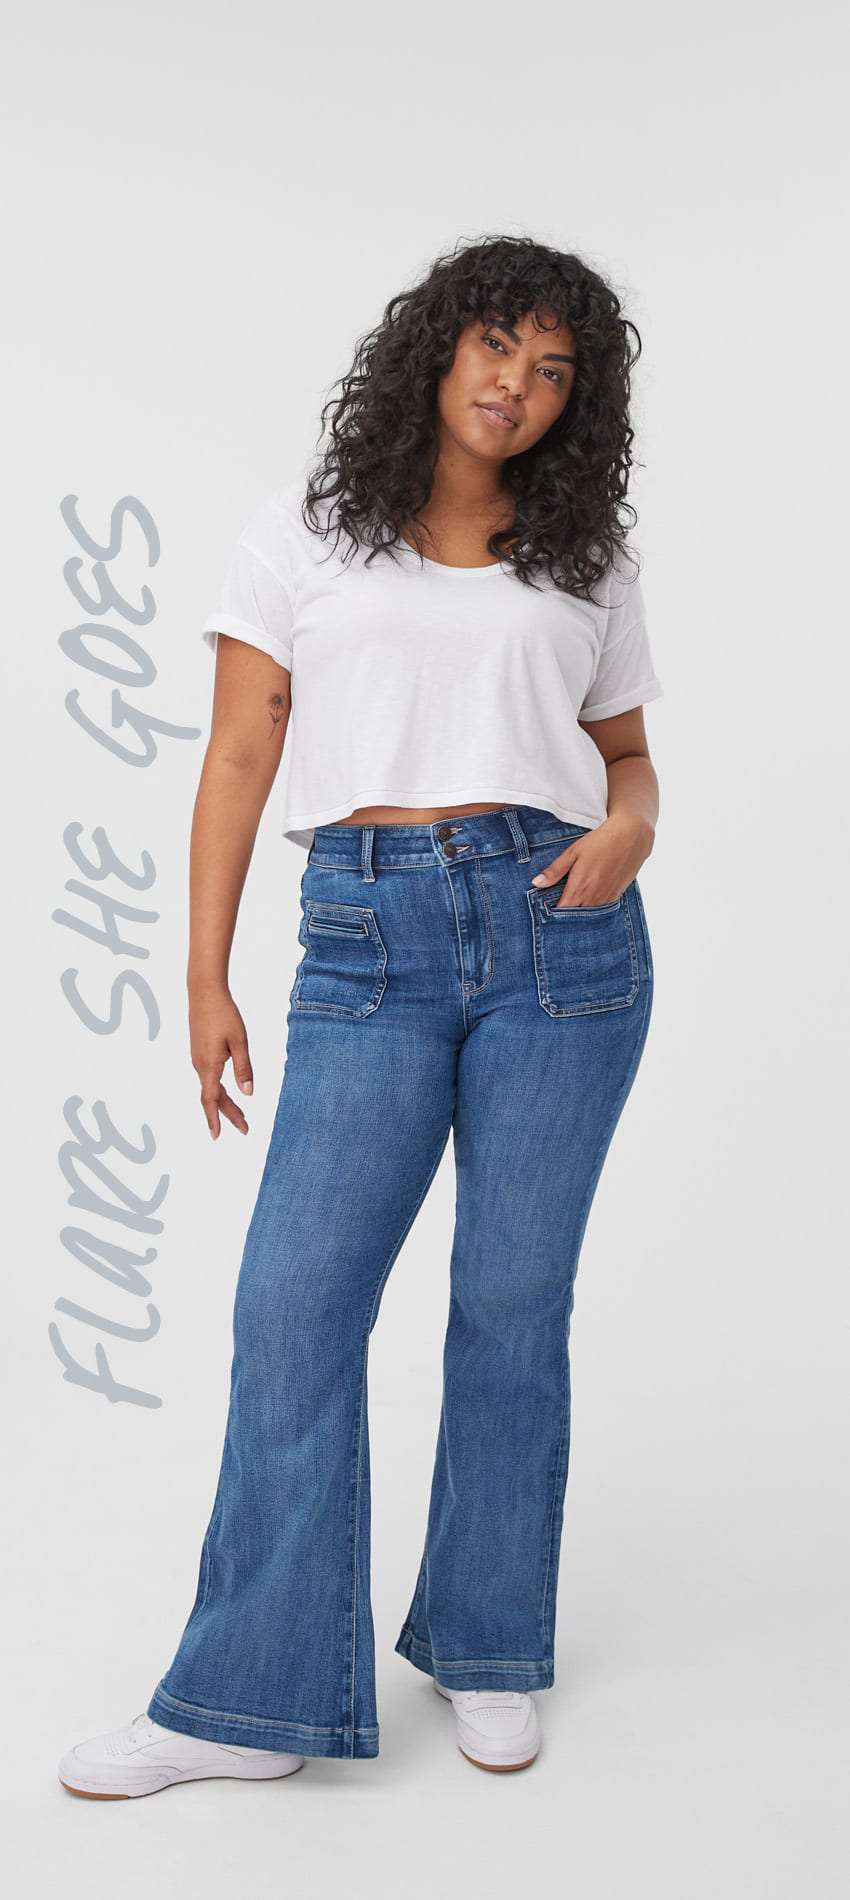 Women's Jeans: Mom, Baggy, Flare, Jegging u0026 More | American Eagle